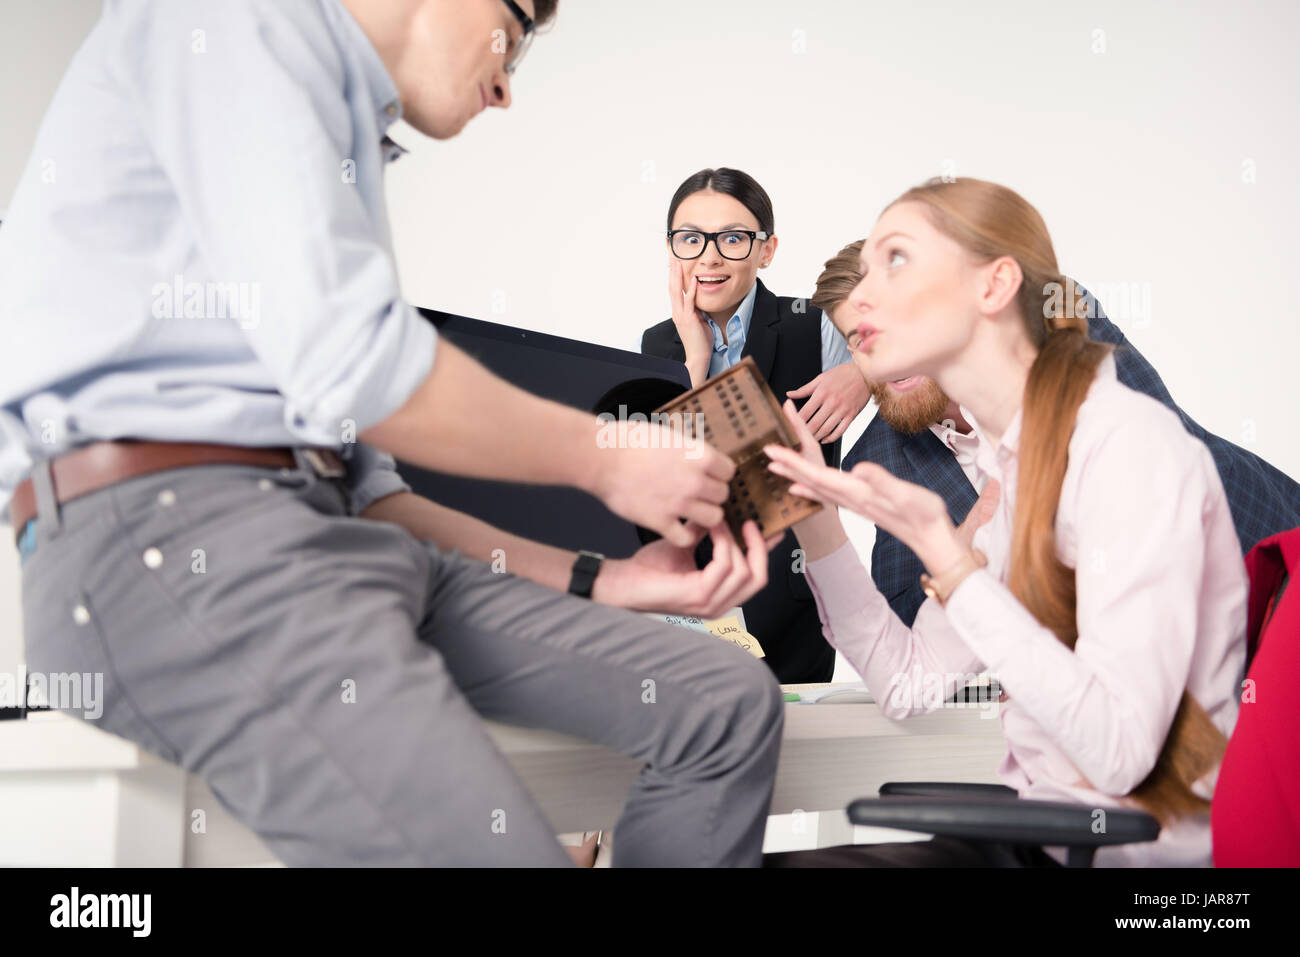 Young businesspeople working together Stock Photo